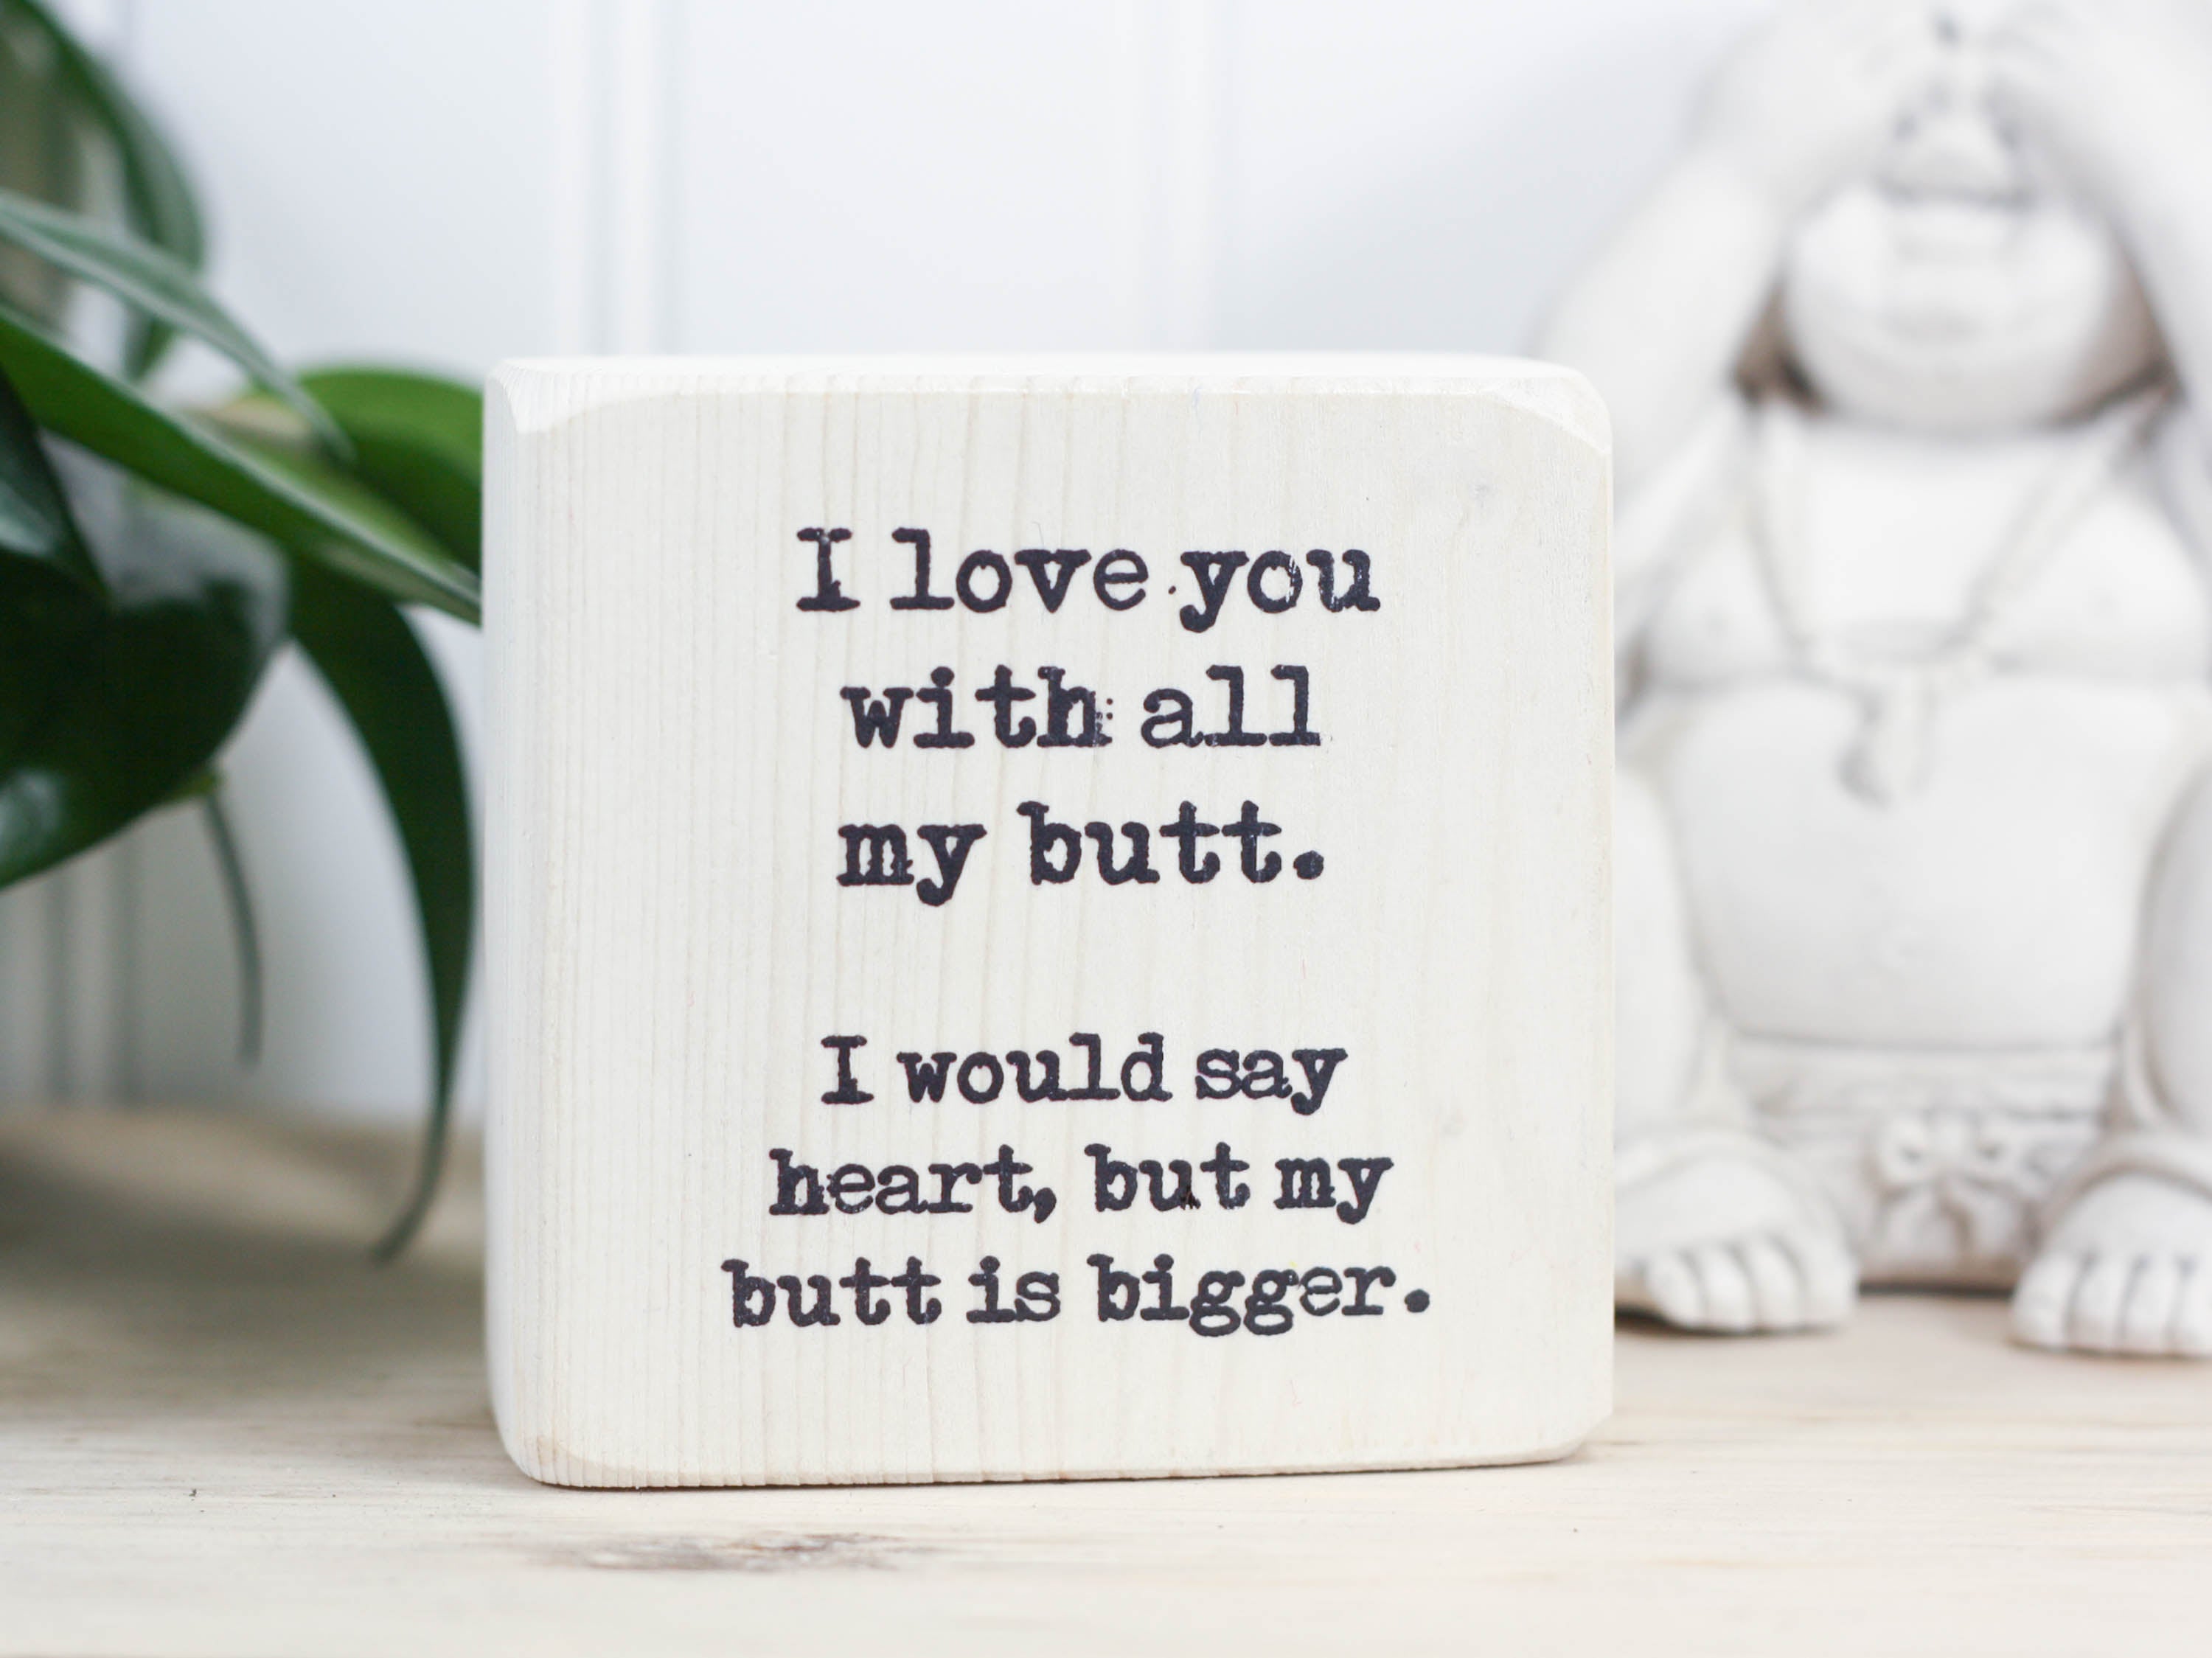 Small freestanding decor in whitewash with the saying "I love you with all my butt. I would say heart, but my butt is bigger." Hilarious and romantic.